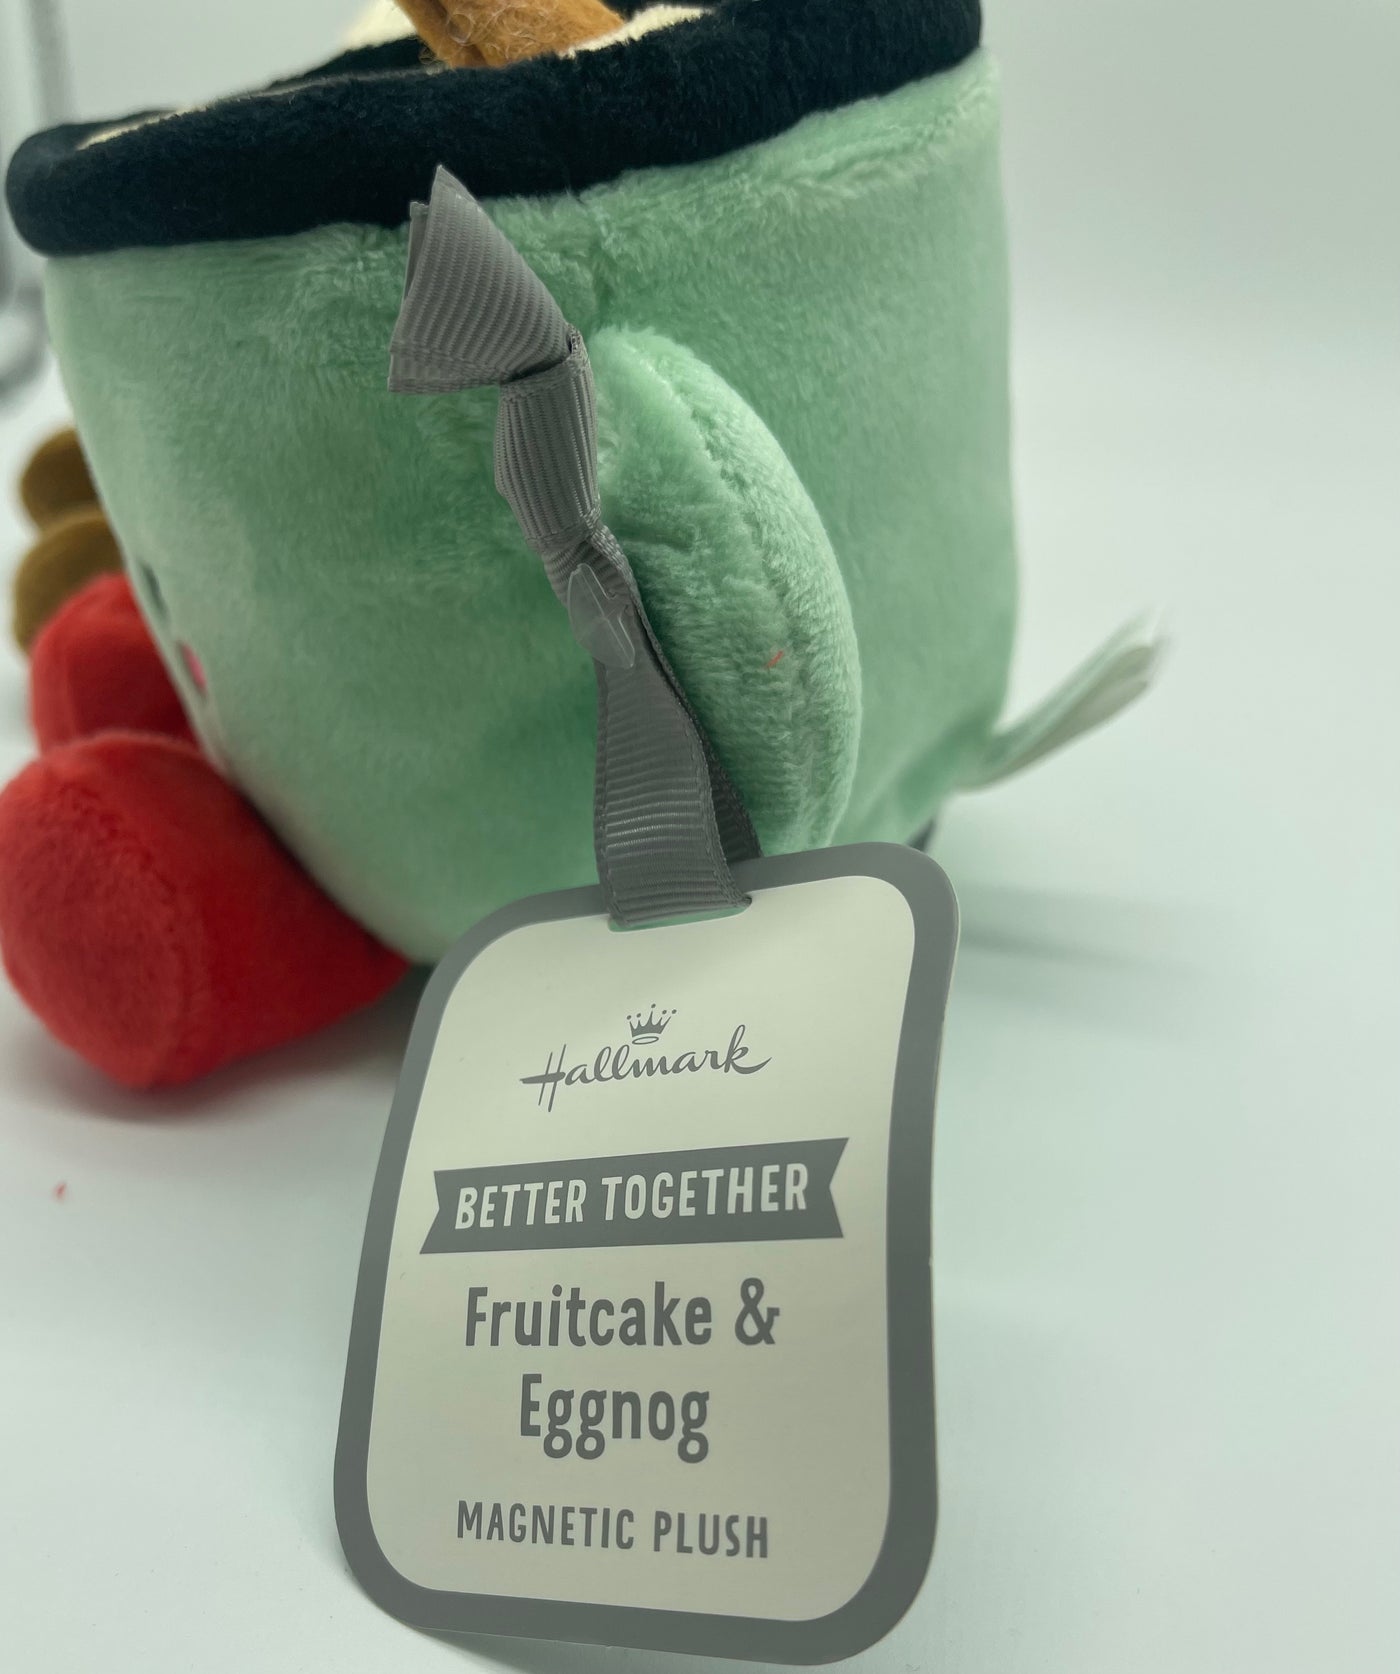 Hallmark Better Together Fruitcake and Eggnog Magnetic Plush New with Tag